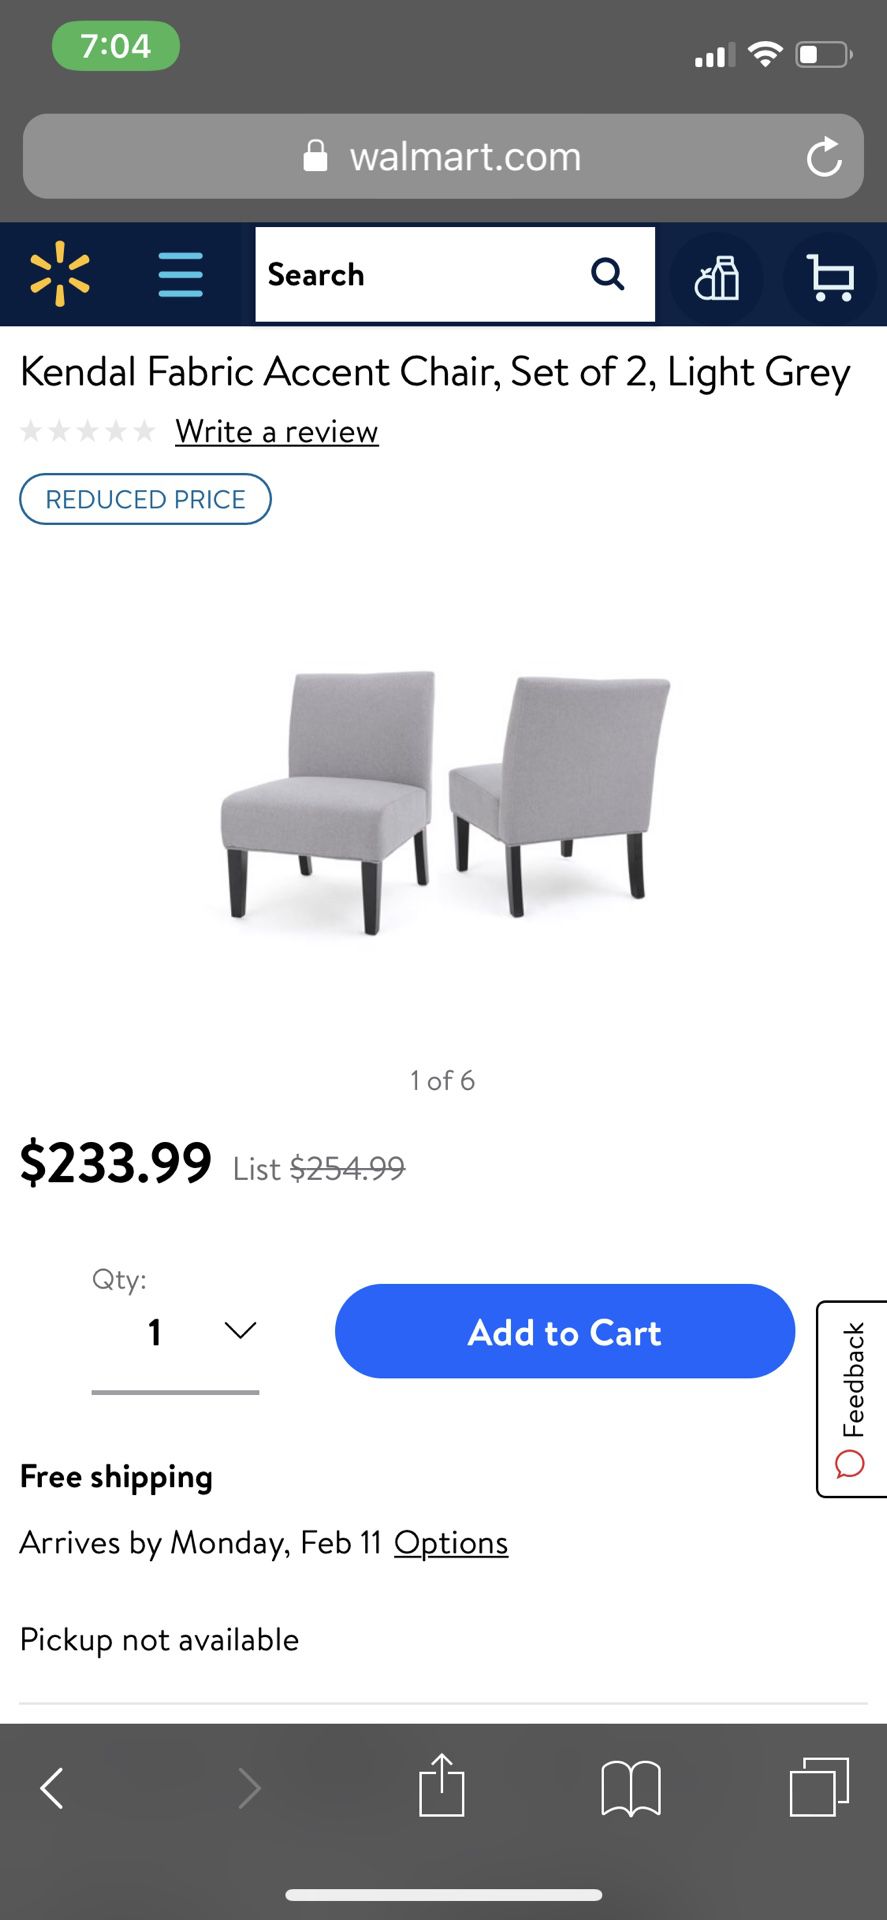 Brand new set of chairs